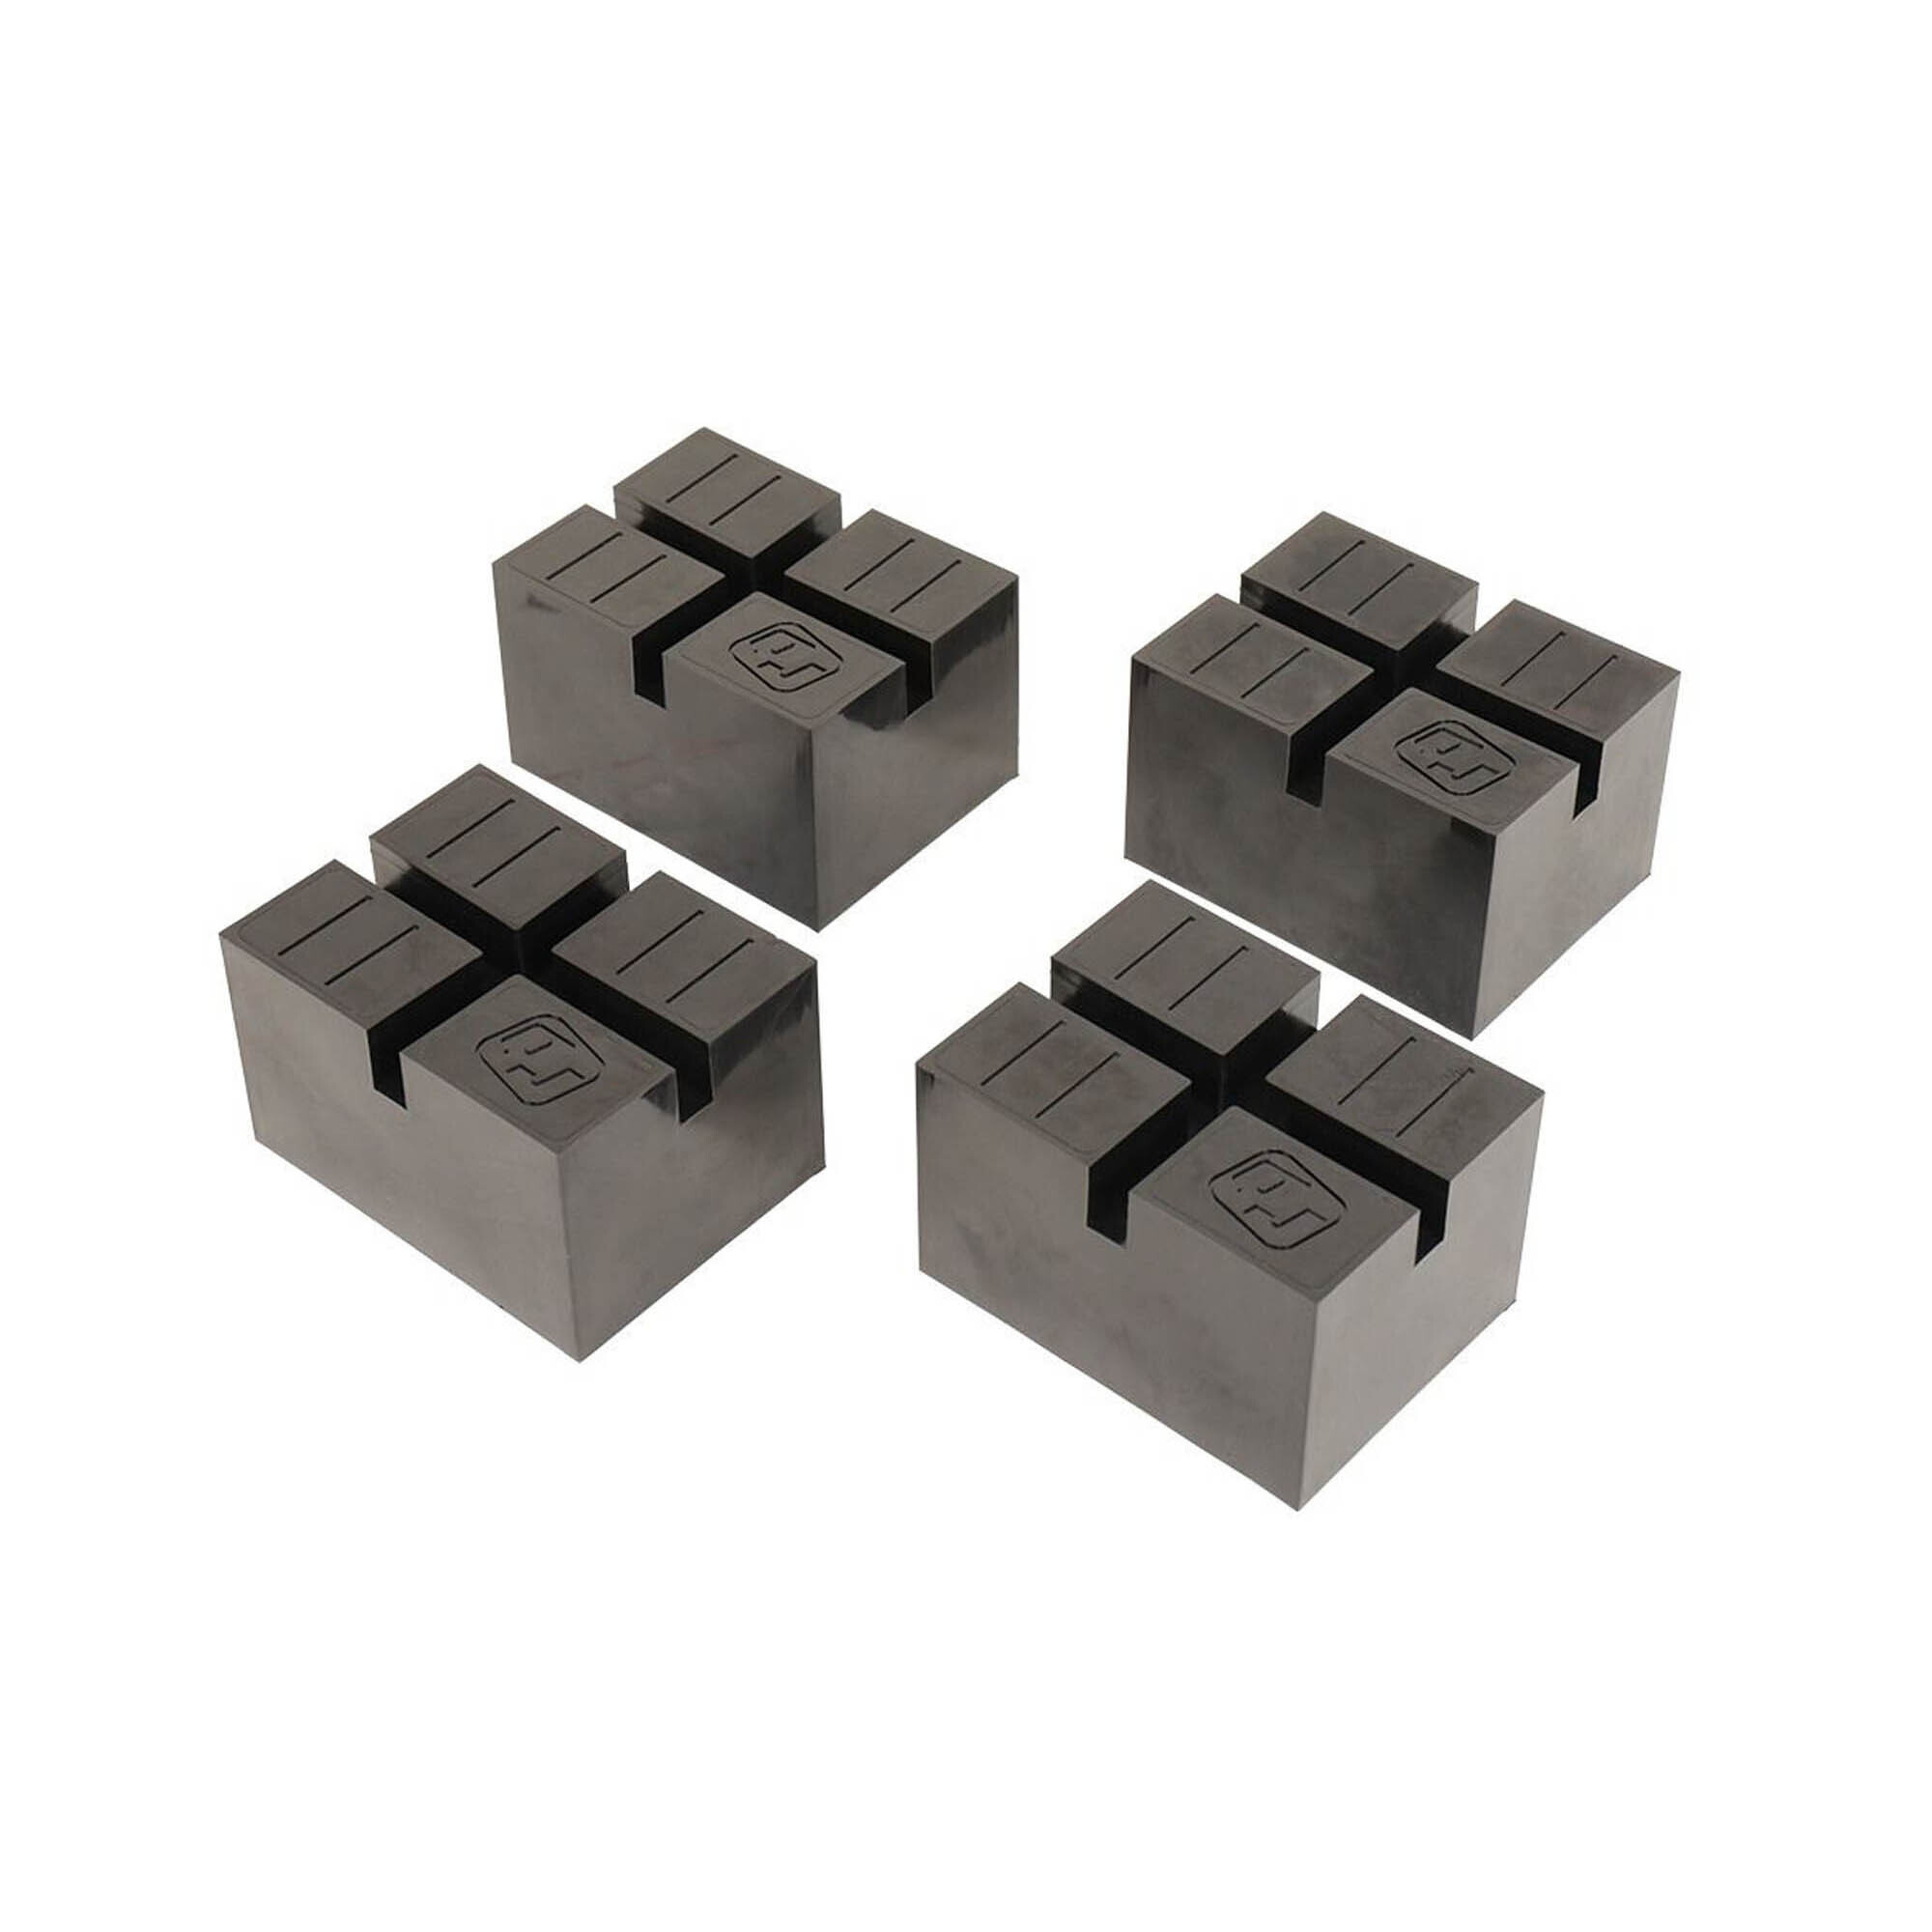 QuickJack, Urethane rubber block with pinch-weld design, Included (qty.) 4 Model 5300013